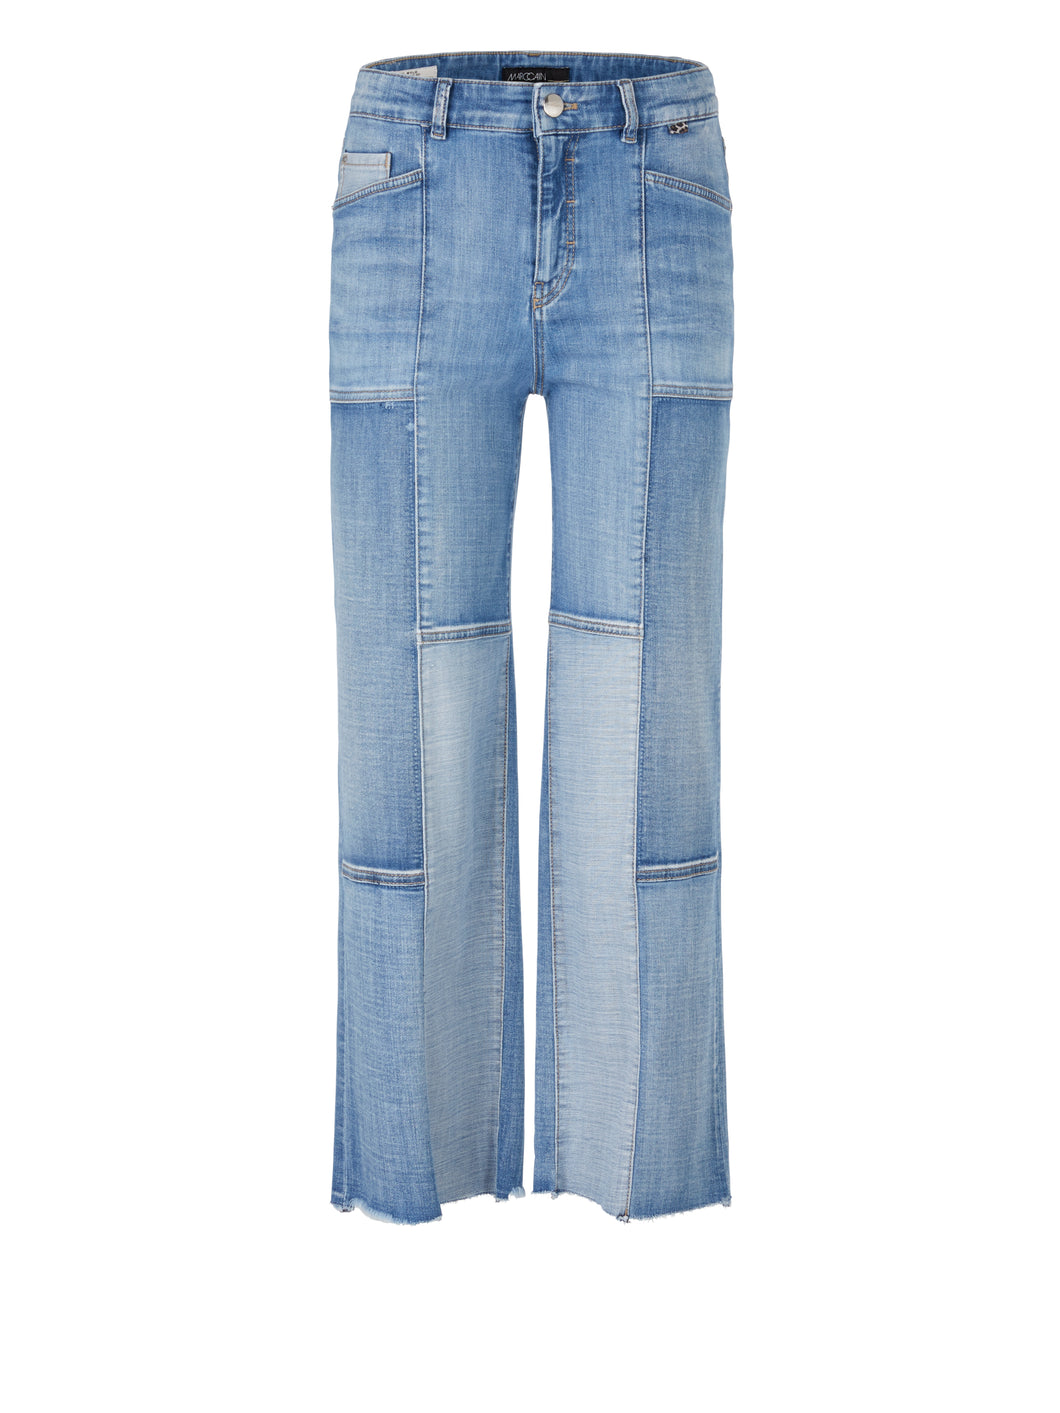 Marccain “Rethink Together” Jeans Modell WYLIE